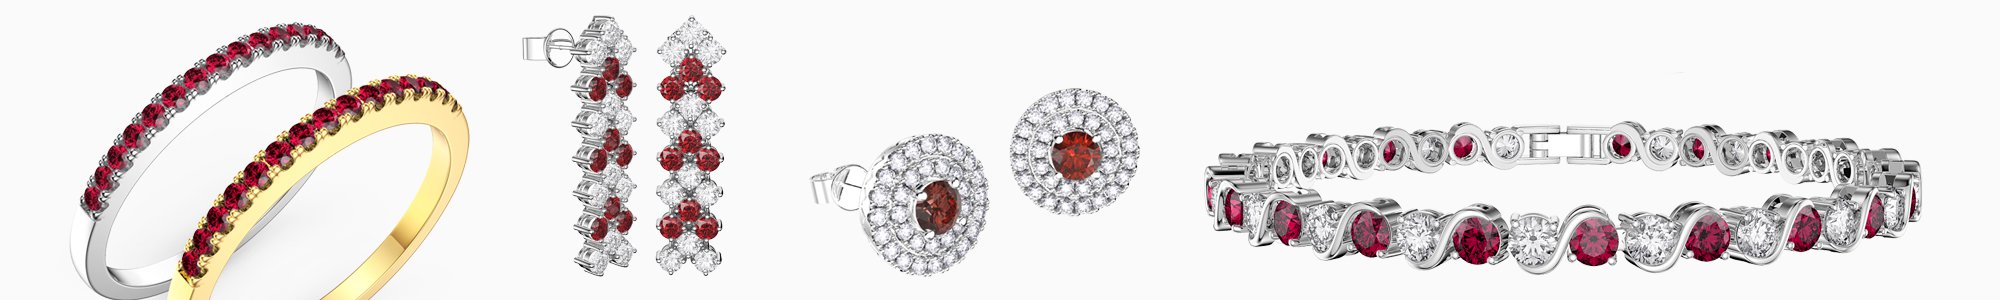 Ruby Jewellery - Ruby Necklaces, Earrings, Studs, Drops, Pendants, Engagement Rings and Bracelets